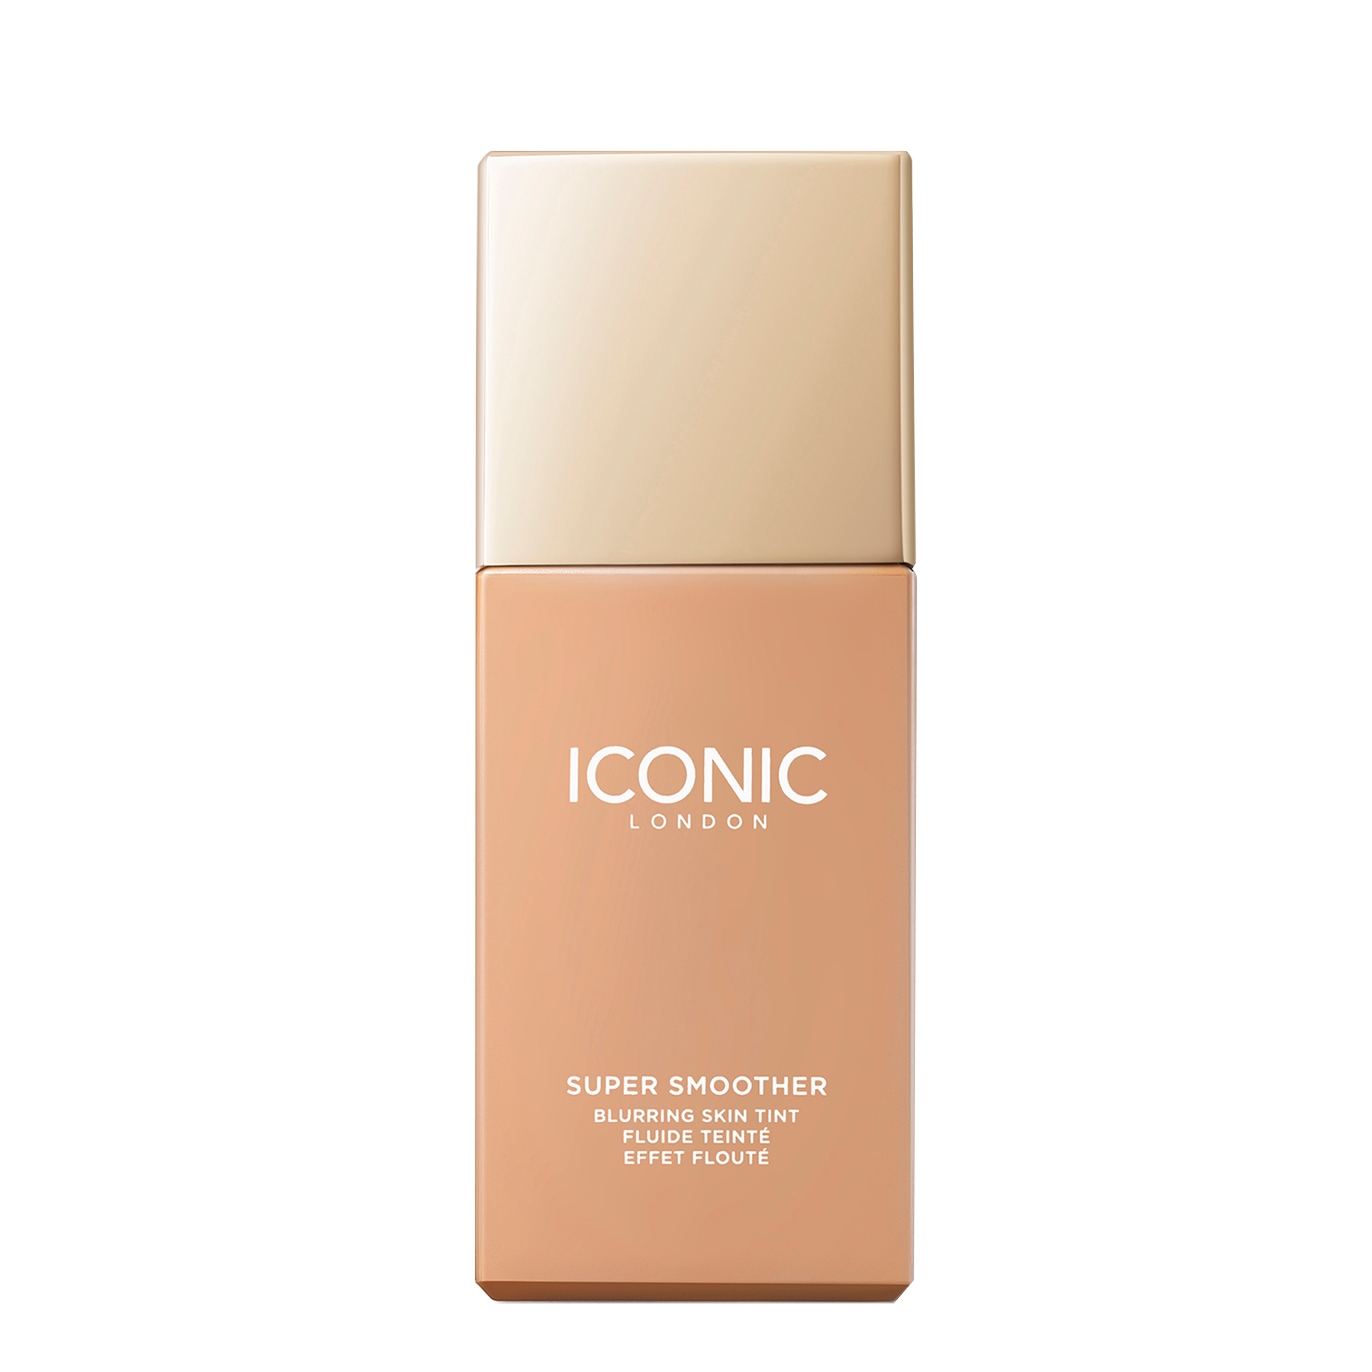 Iconic London Super Smoother Blurring Skin Tint - Colour Cool Light